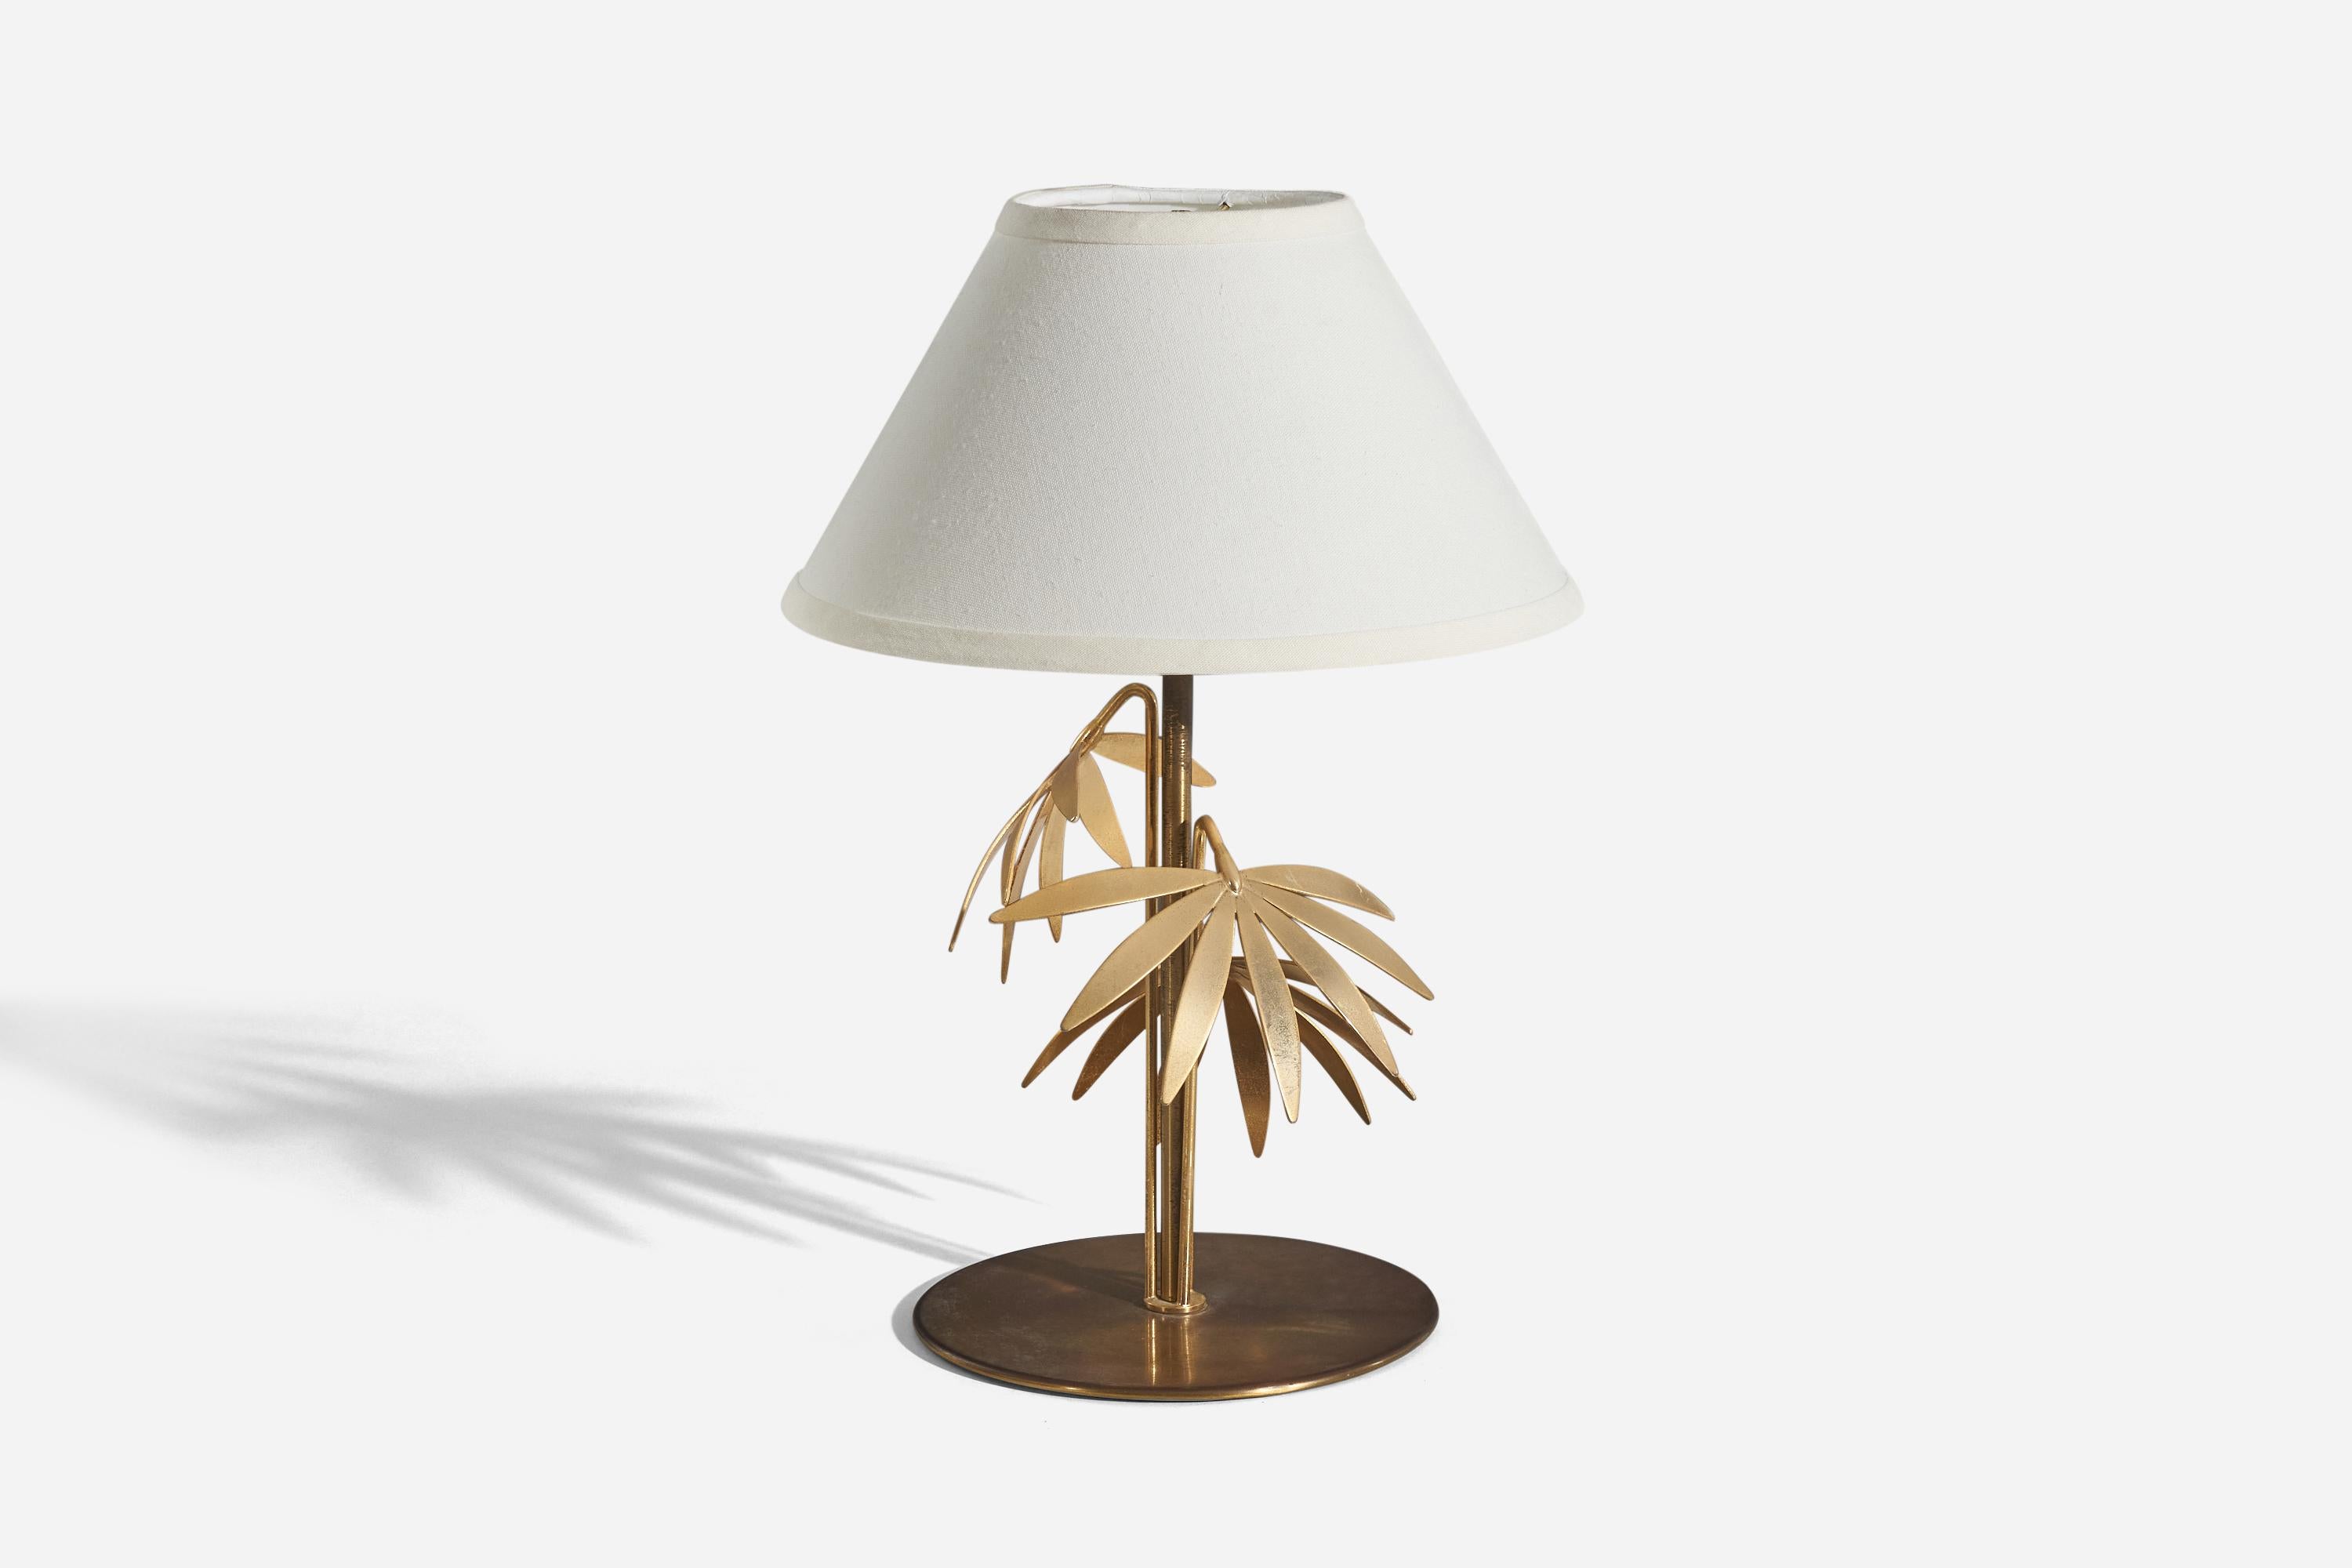 A brass table lamp designed and produced in Italy, 1970s. 

Sold without lampshade. 
Dimensions of lamp (inches) : 14.81 x 8.37 x 8.37 (H x W x D)
Dimensions of shade (inches) : 5.18 x 12 x 7.25 (T x B x S)
Dimension of lamp with shade (inches)